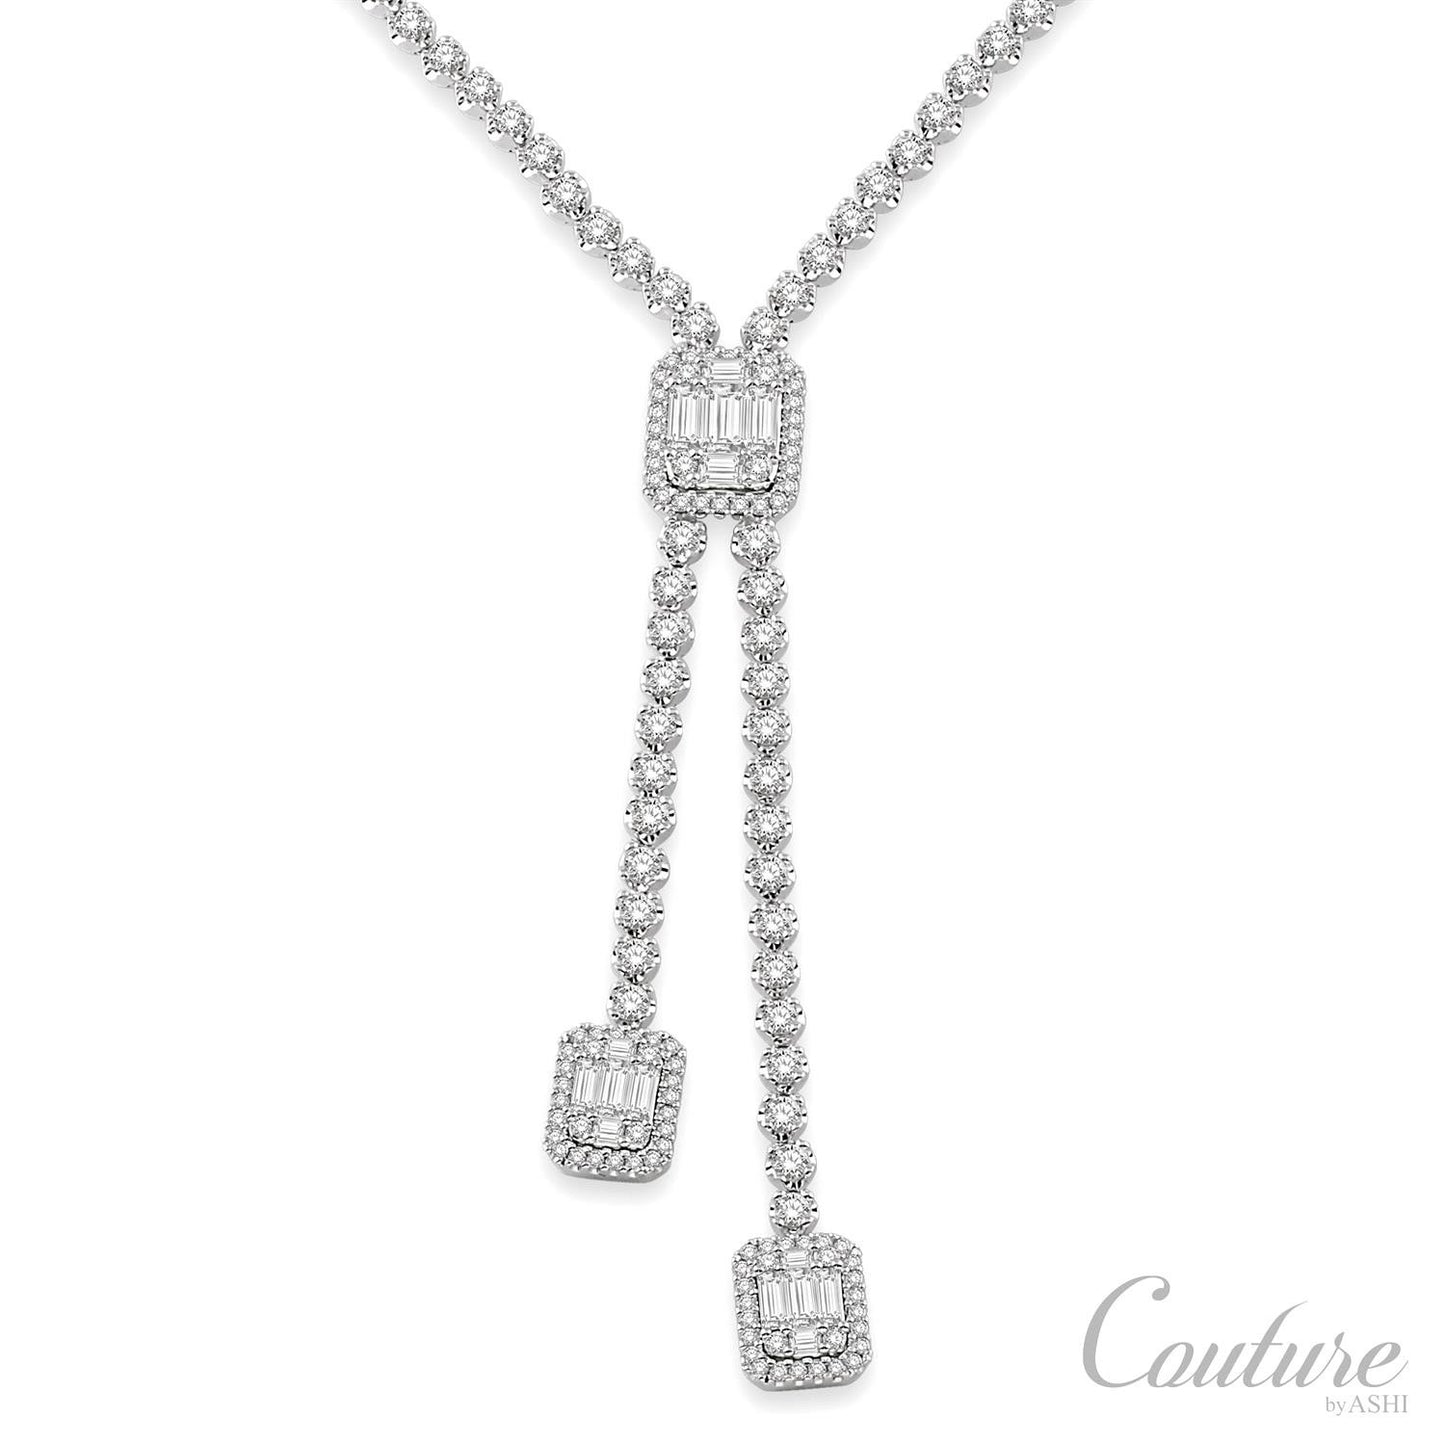 18k Couture Petite Baguette Negligee Necklace